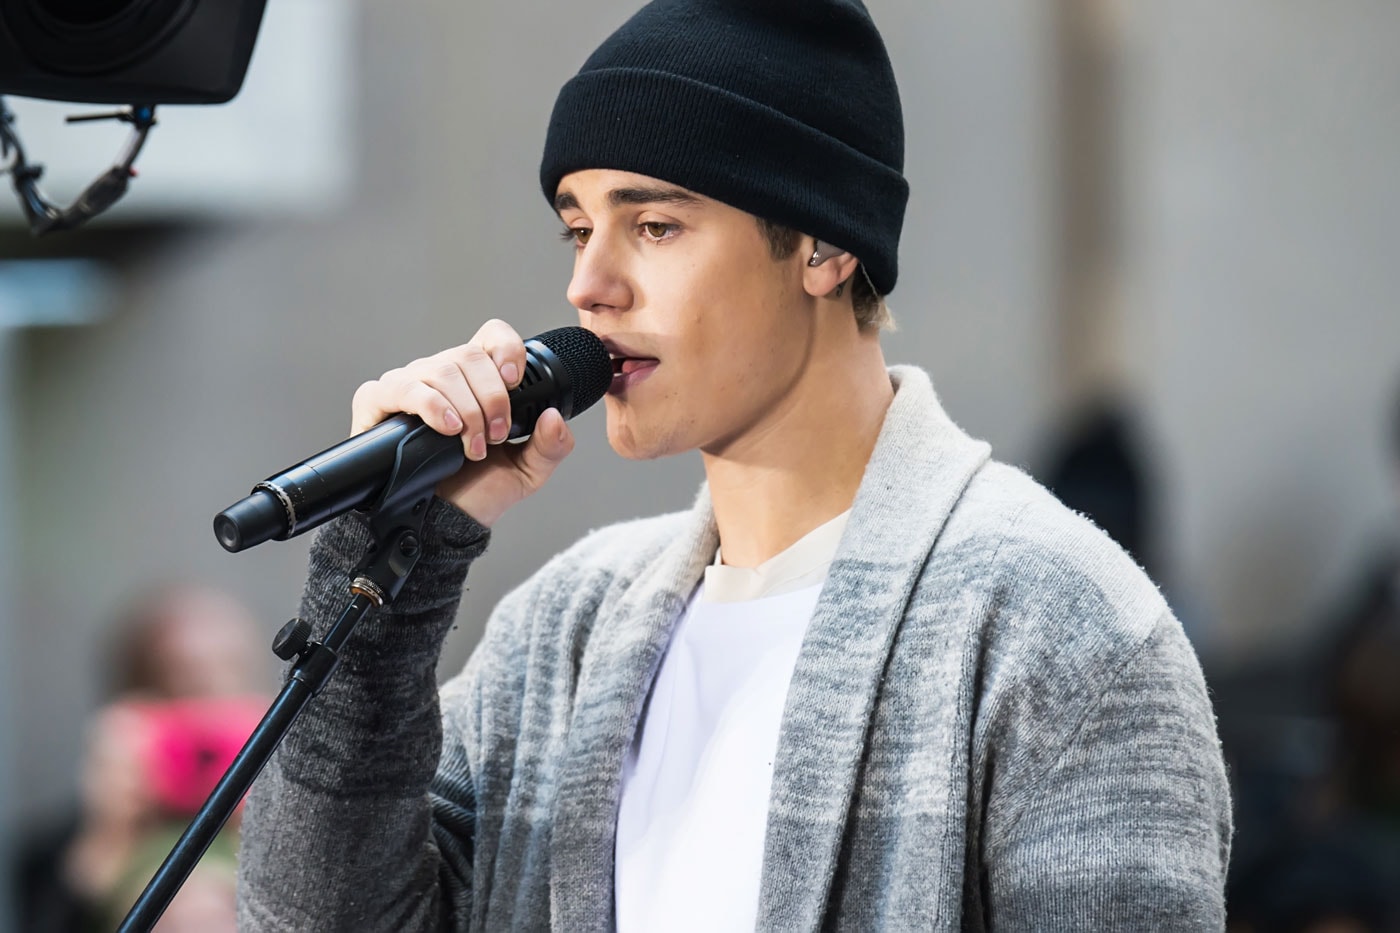 Justin Bieber's "What Do You Mean" Tops Billboard Hot 100 Chart